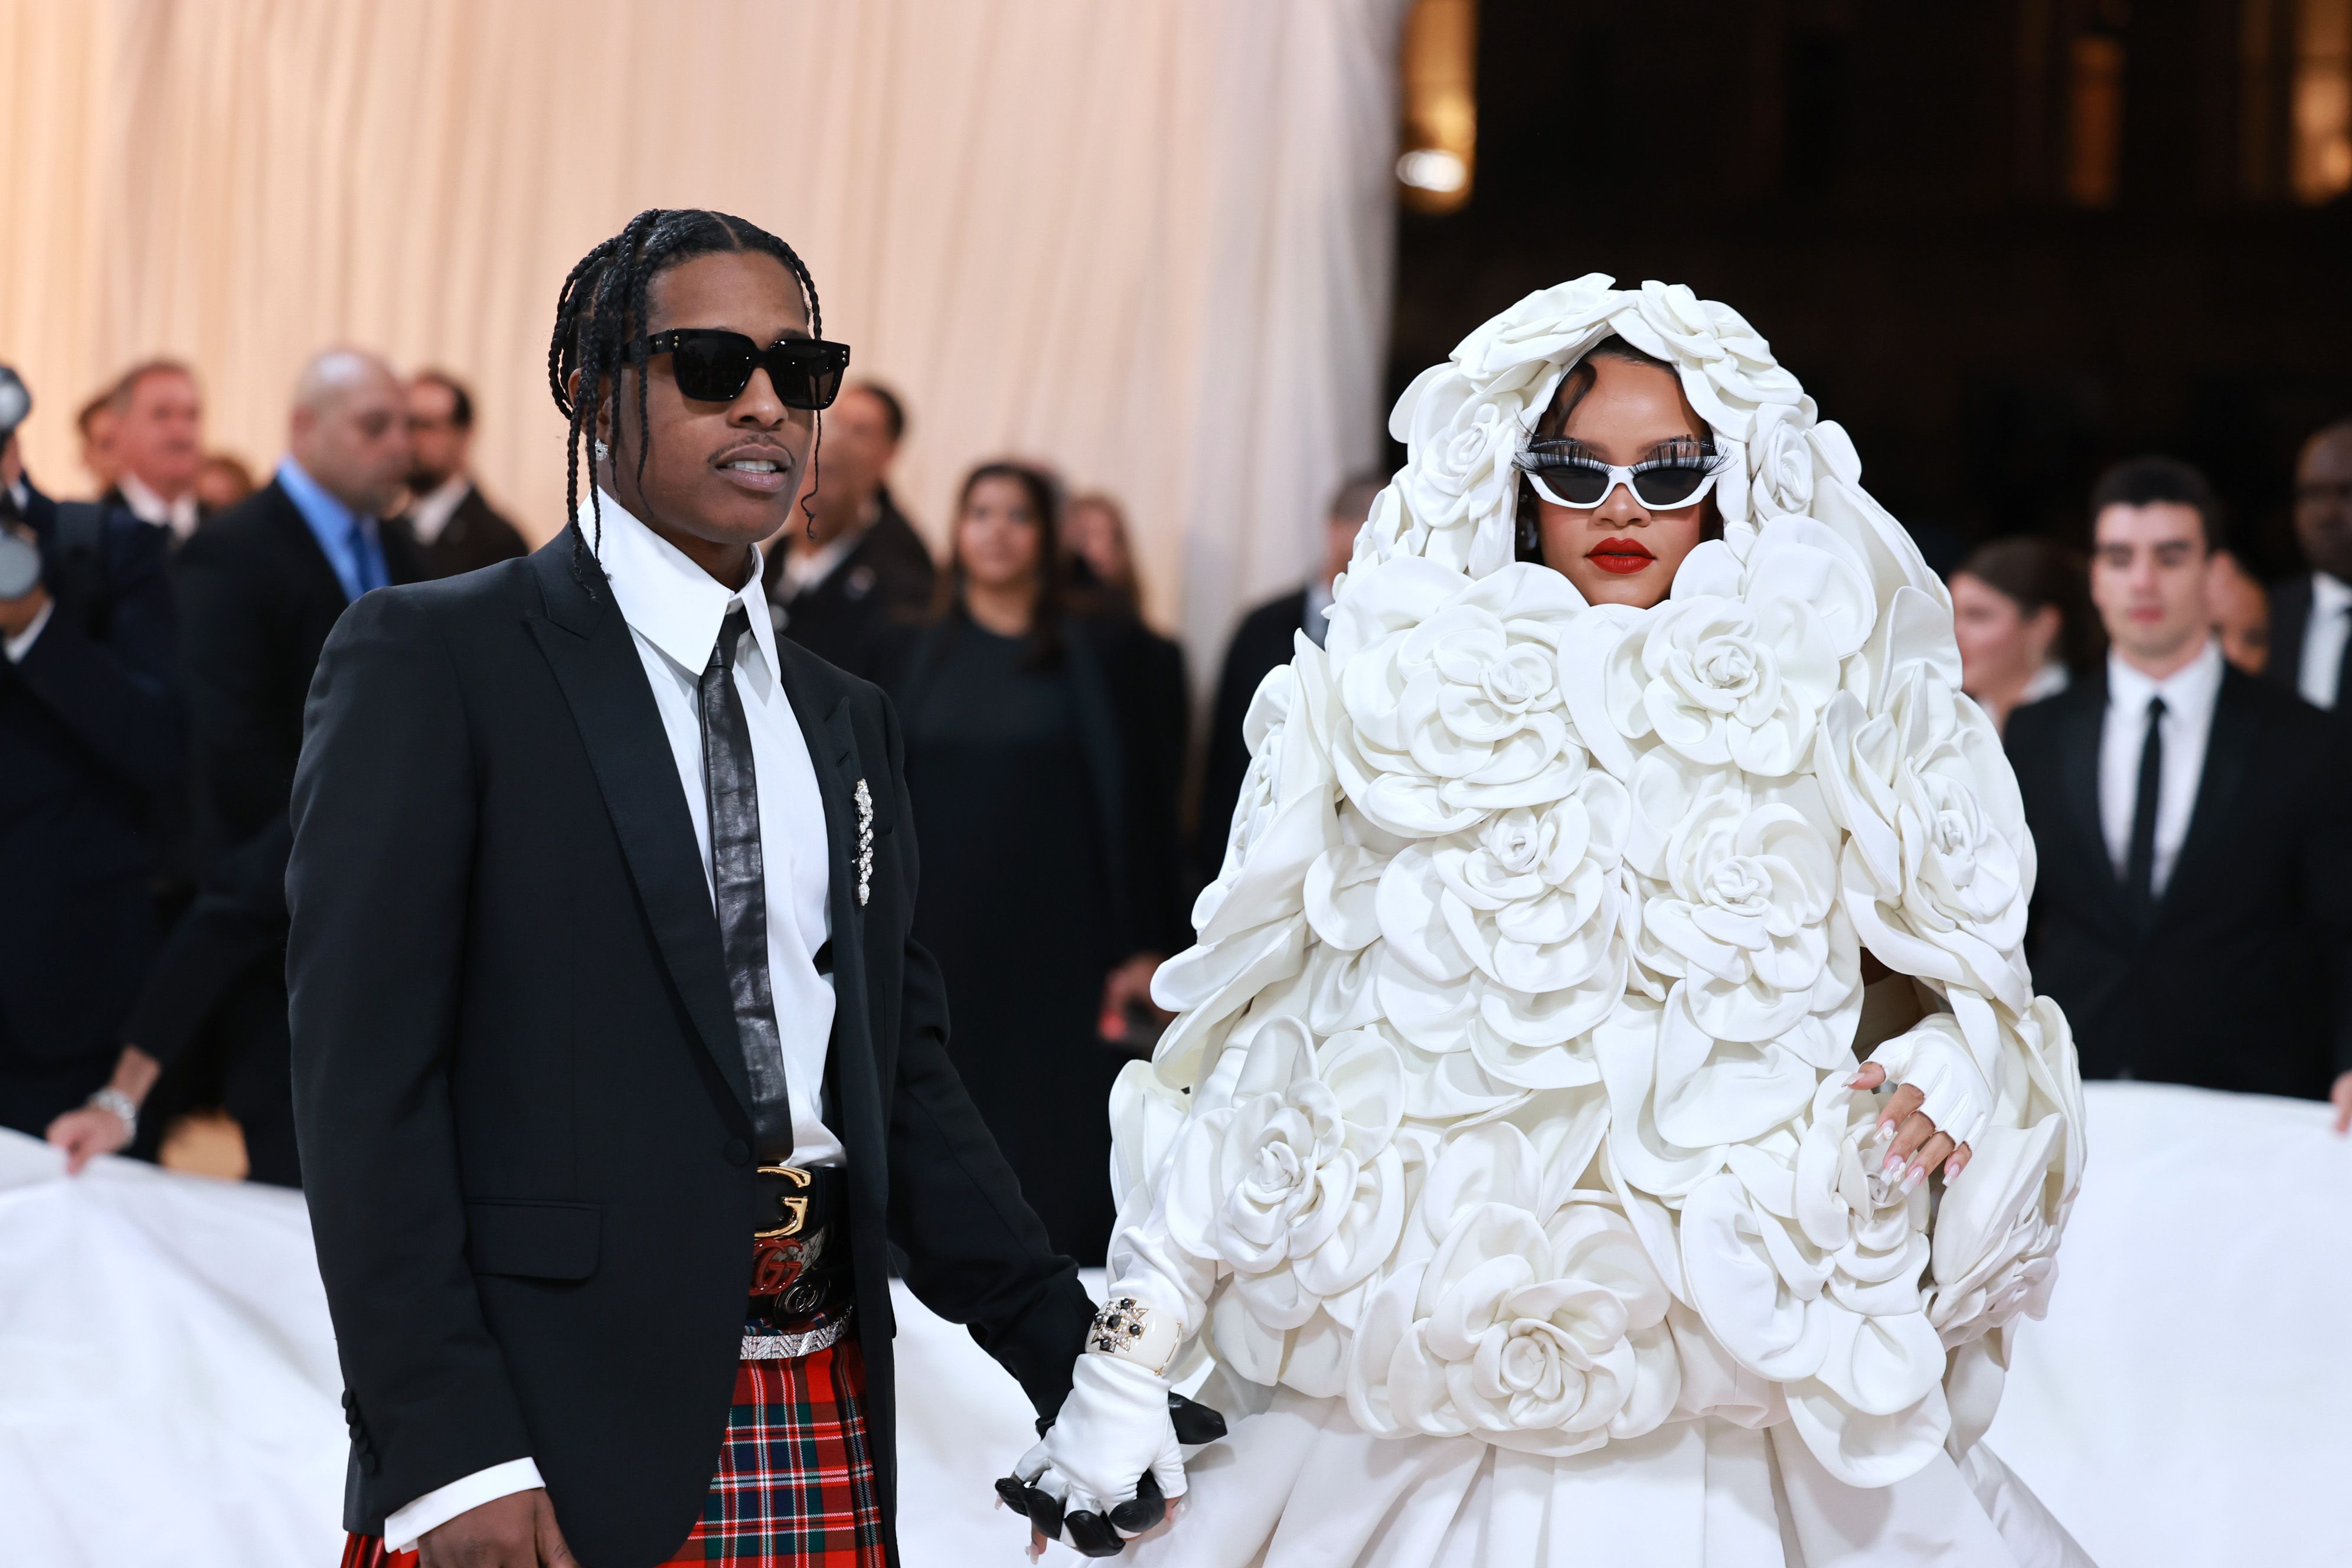 Met Gala 2023 - Date, Theme, Guests - Parade